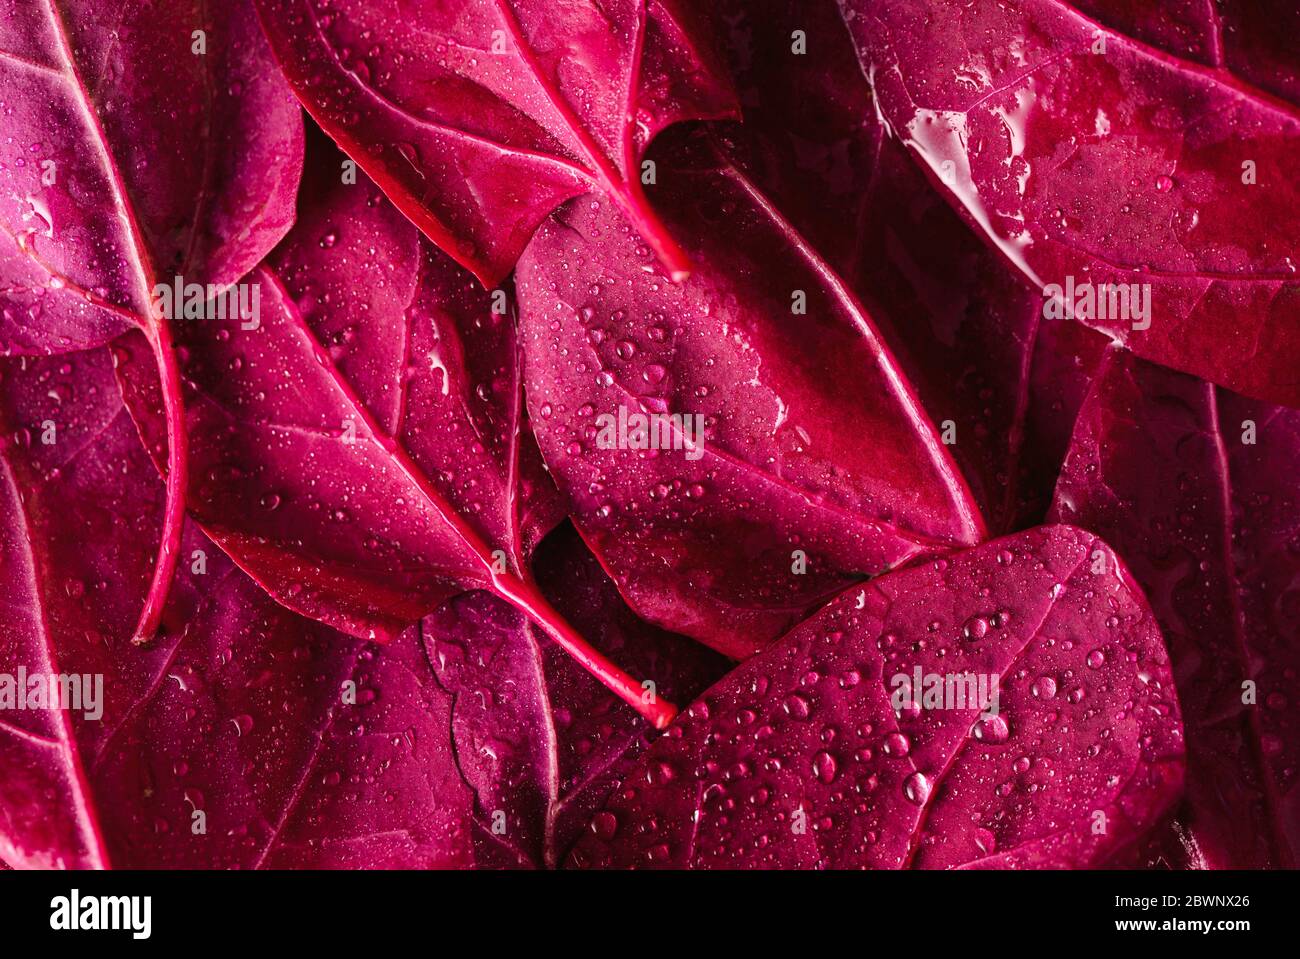 Red orache or mountain spinach leaves sprinkled with water. Background with atriplex hortensis red leaves Stock Photo